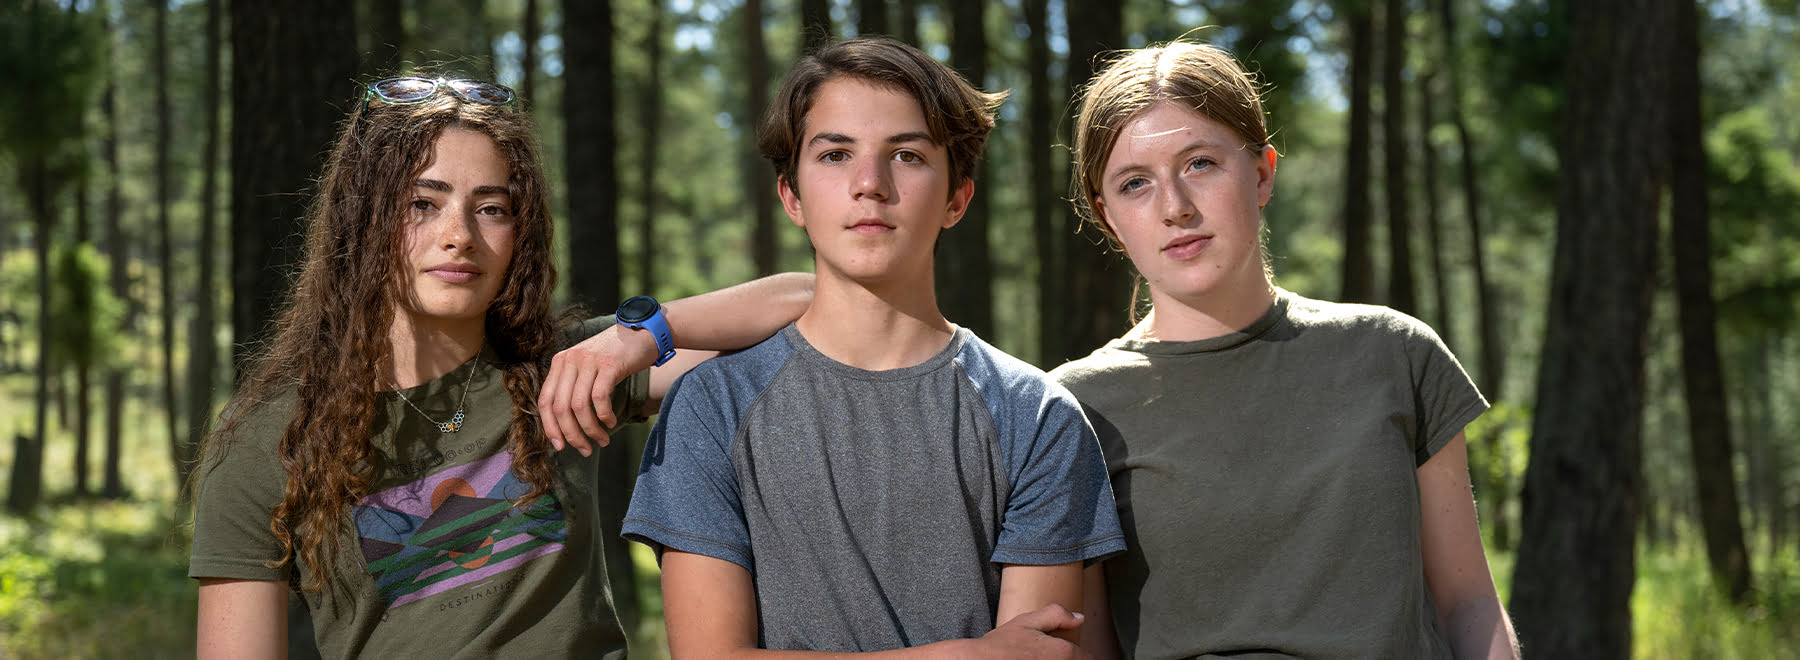 three youth climate plaintiffs fighting for a livable future